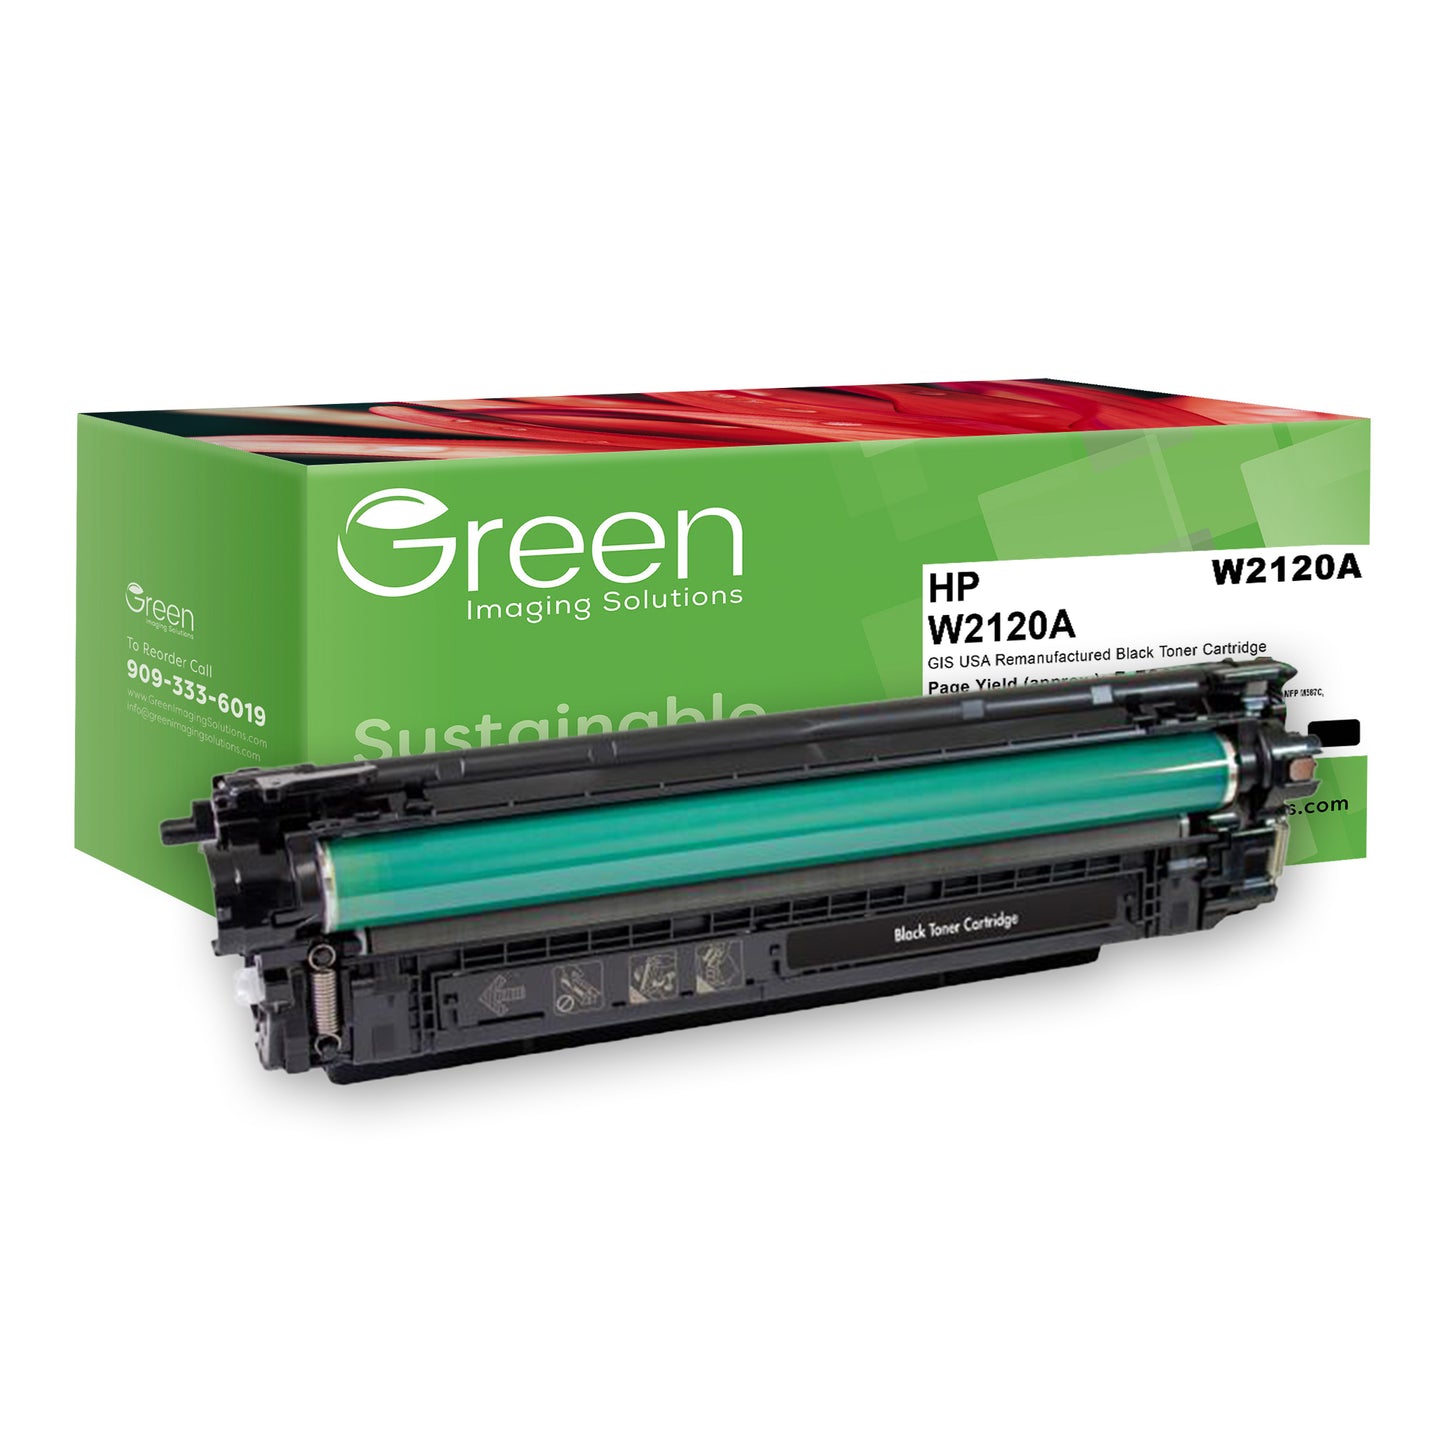 Green Imaging Solutions USA Remanufactured Black Toner Cartridge (Reused OEM Chip) for HP 212A (W2120A)